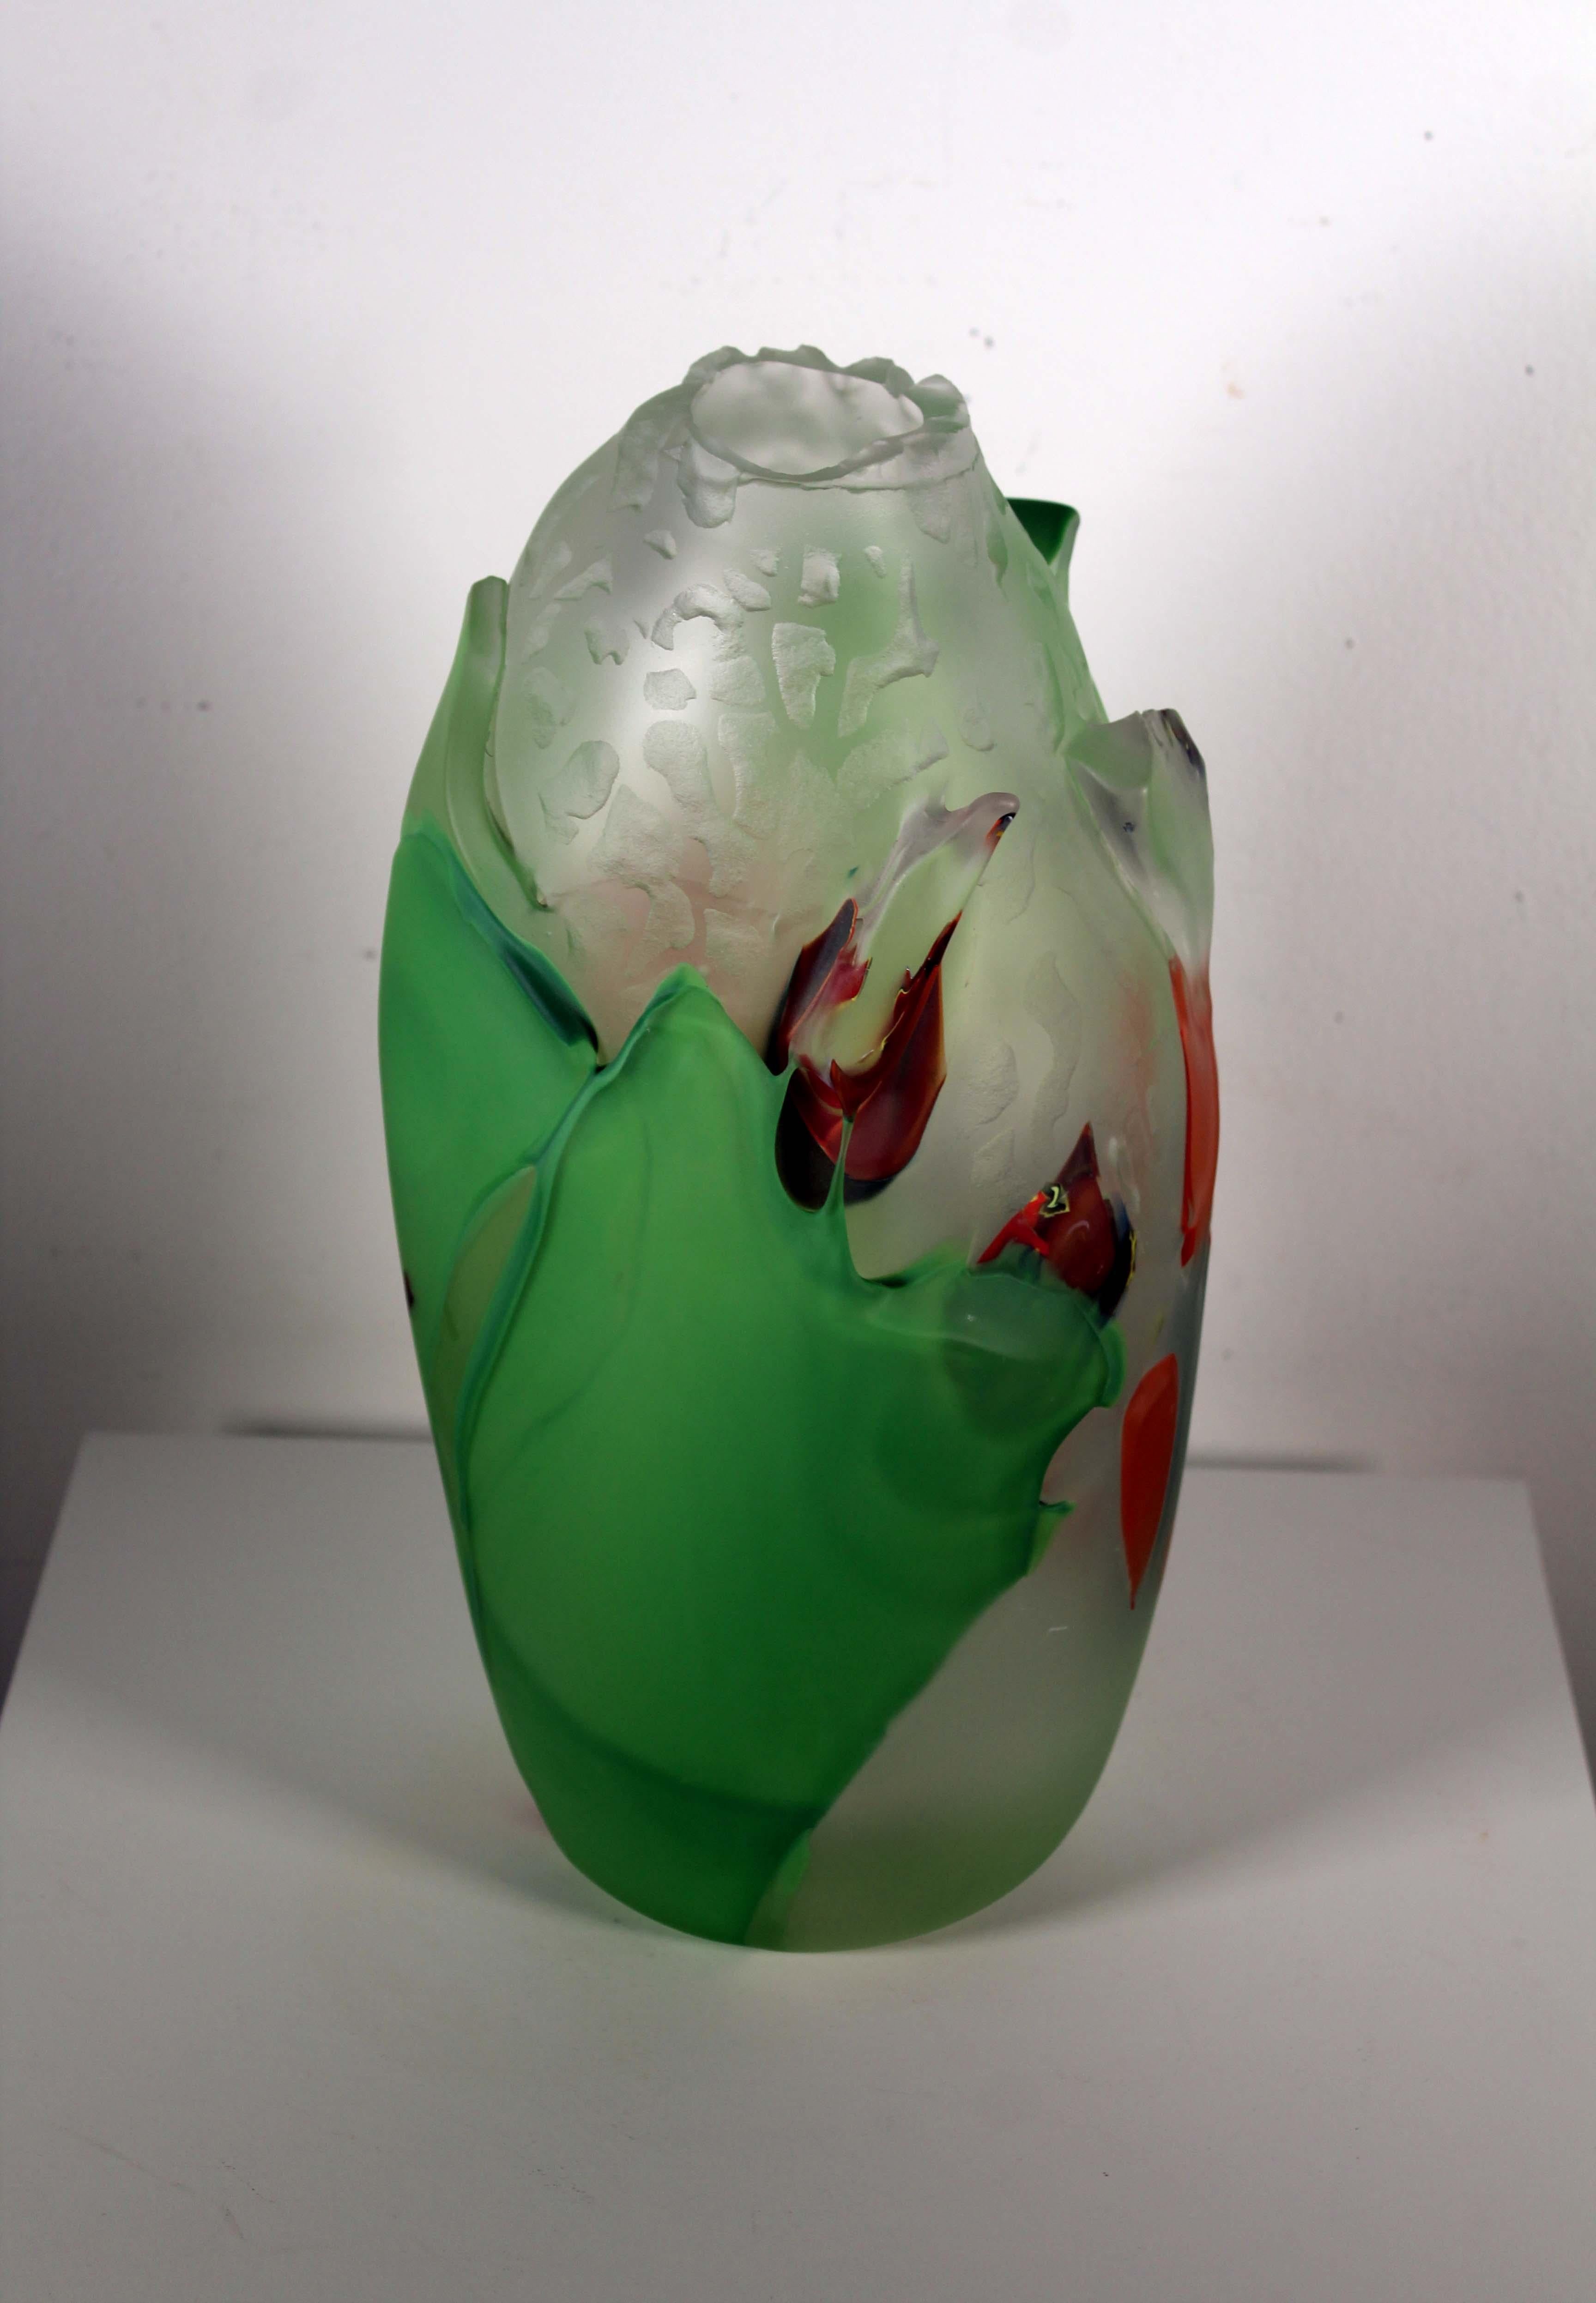 A stunning contemporary handblown art glass vase or vessel by North Carolina based artist Judson Guérard. Etched signature on the bottom. From the chaos series. Per the artist, 